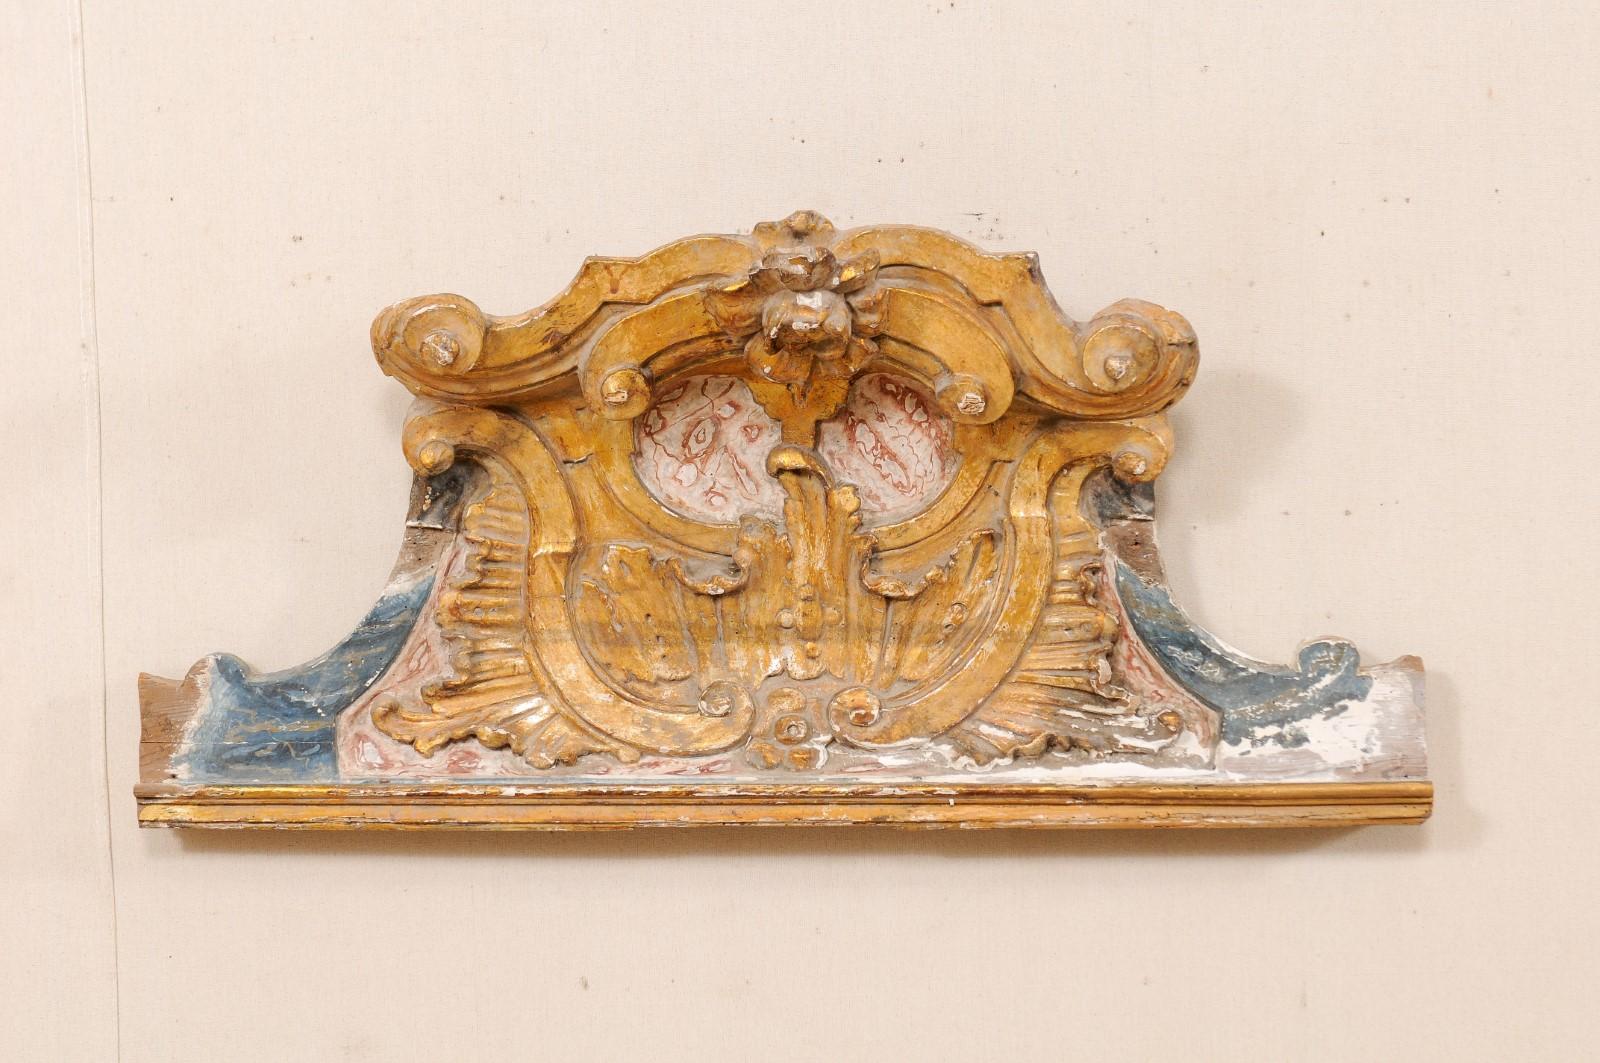 An Italian 19th century carved-wood wall hanging pediment fragment. This Italian Baroque style pediment, from the early 19th century, has gilt over gesso and wood, hand-carved in a volute and acanthus leaf motif with flower at crest, and faux